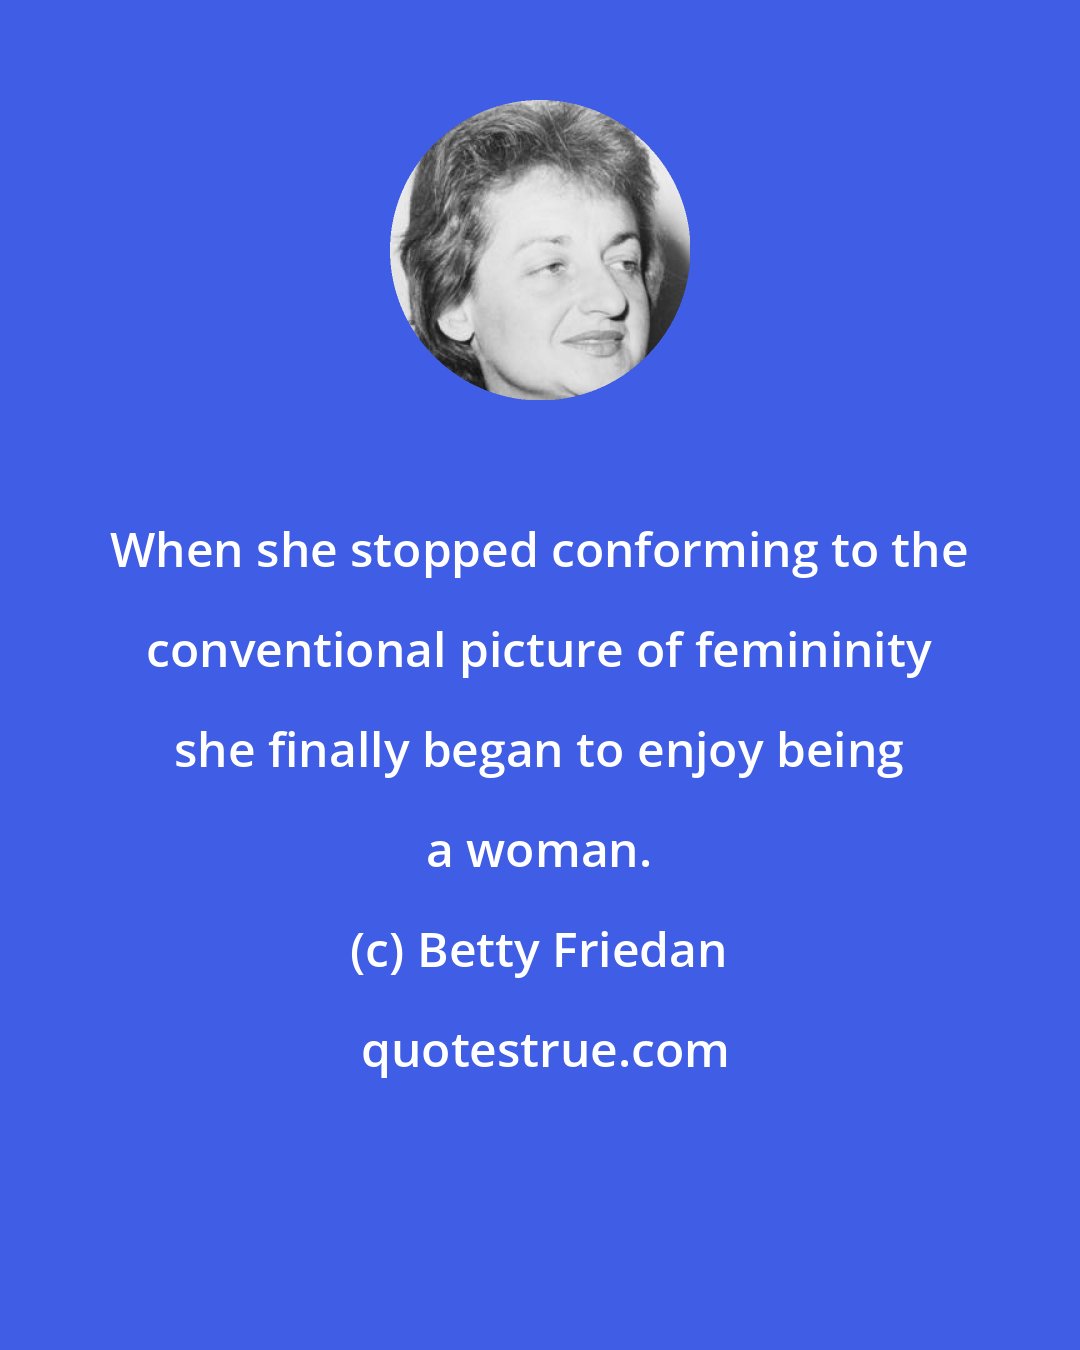 Betty Friedan: When she stopped conforming to the conventional picture of femininity she finally began to enjoy being a woman.